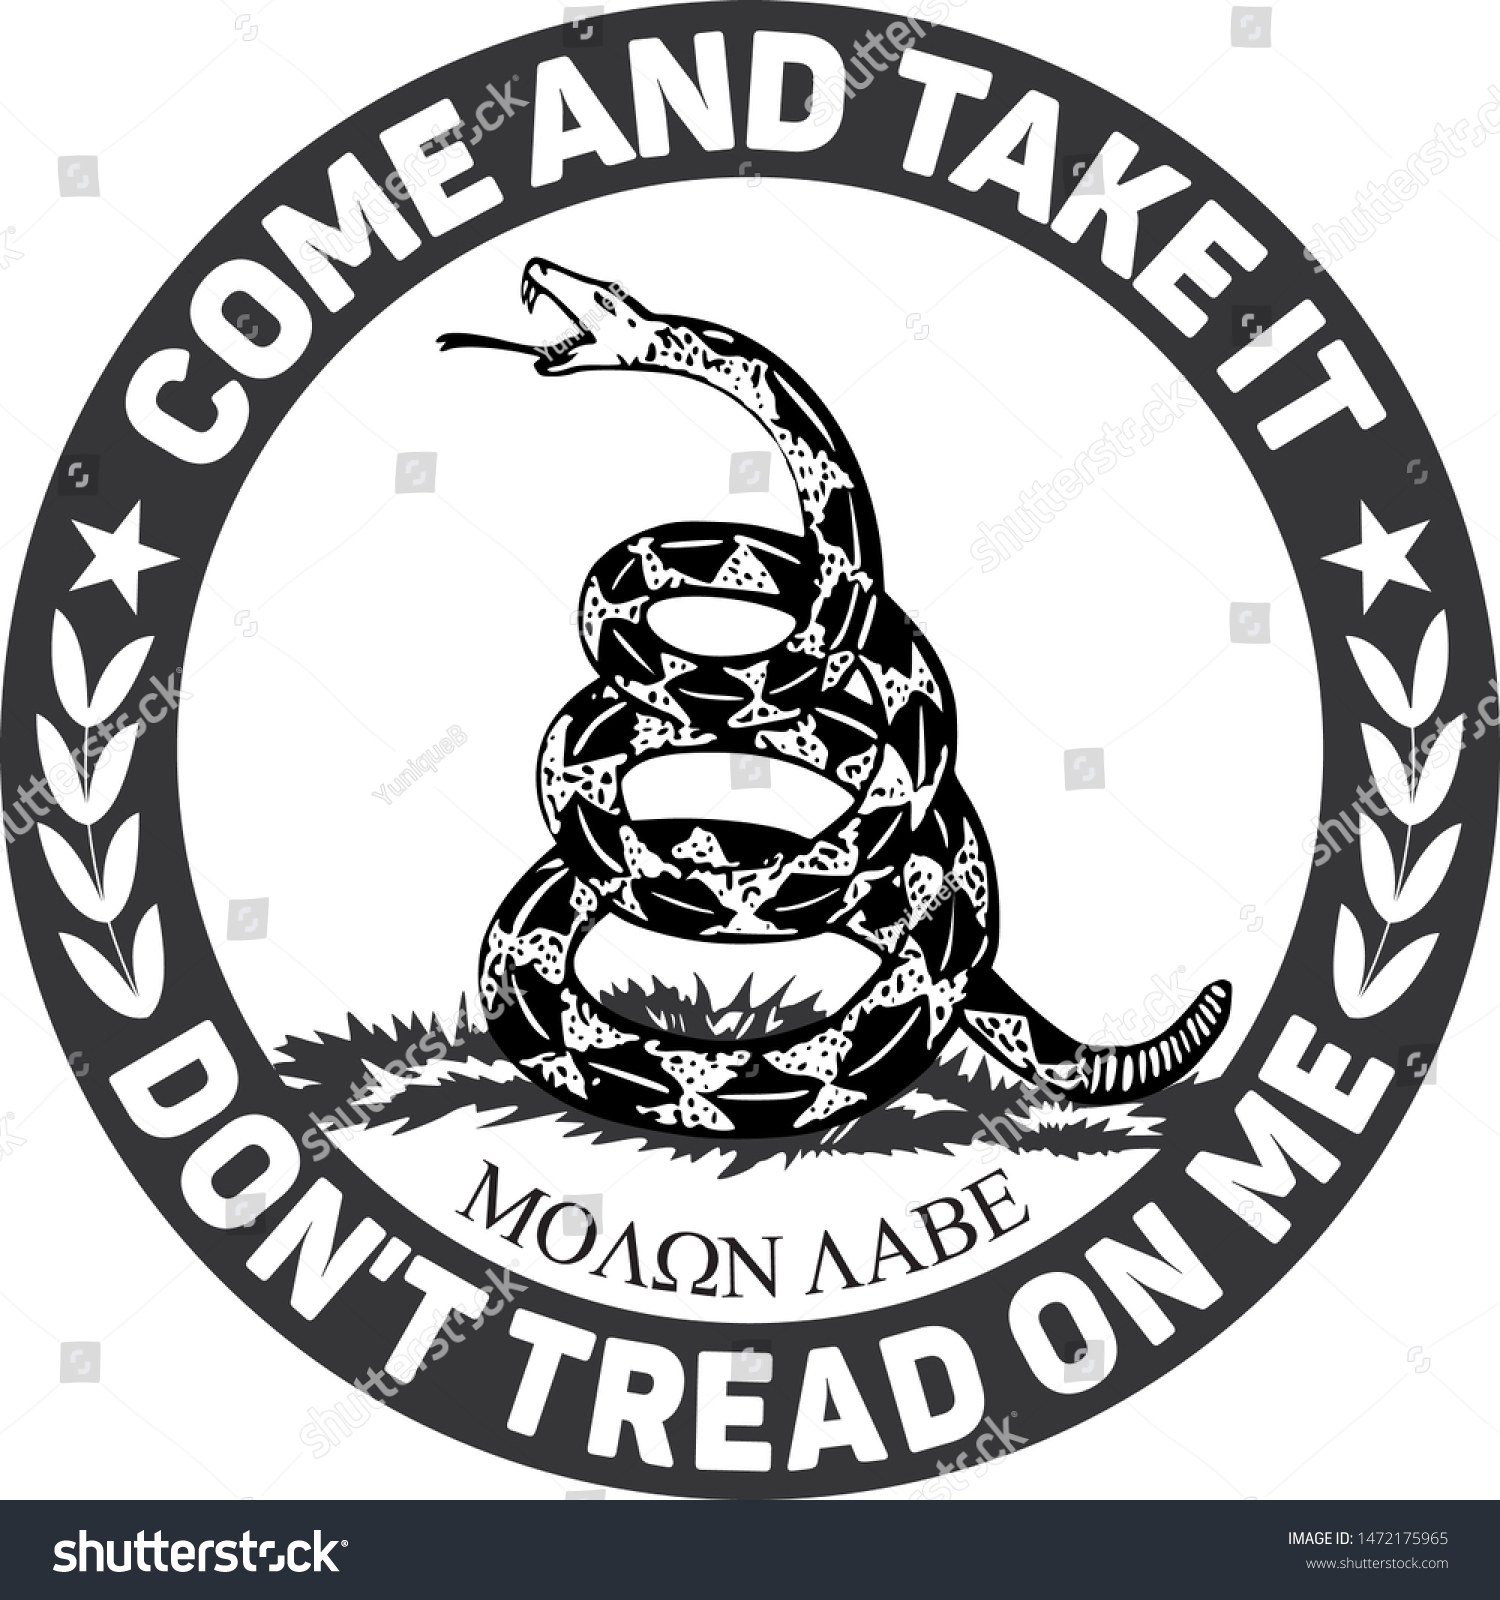 SVG of Come and Take It Don't Tread on Me Molon Labe Emblem in Black and White svg